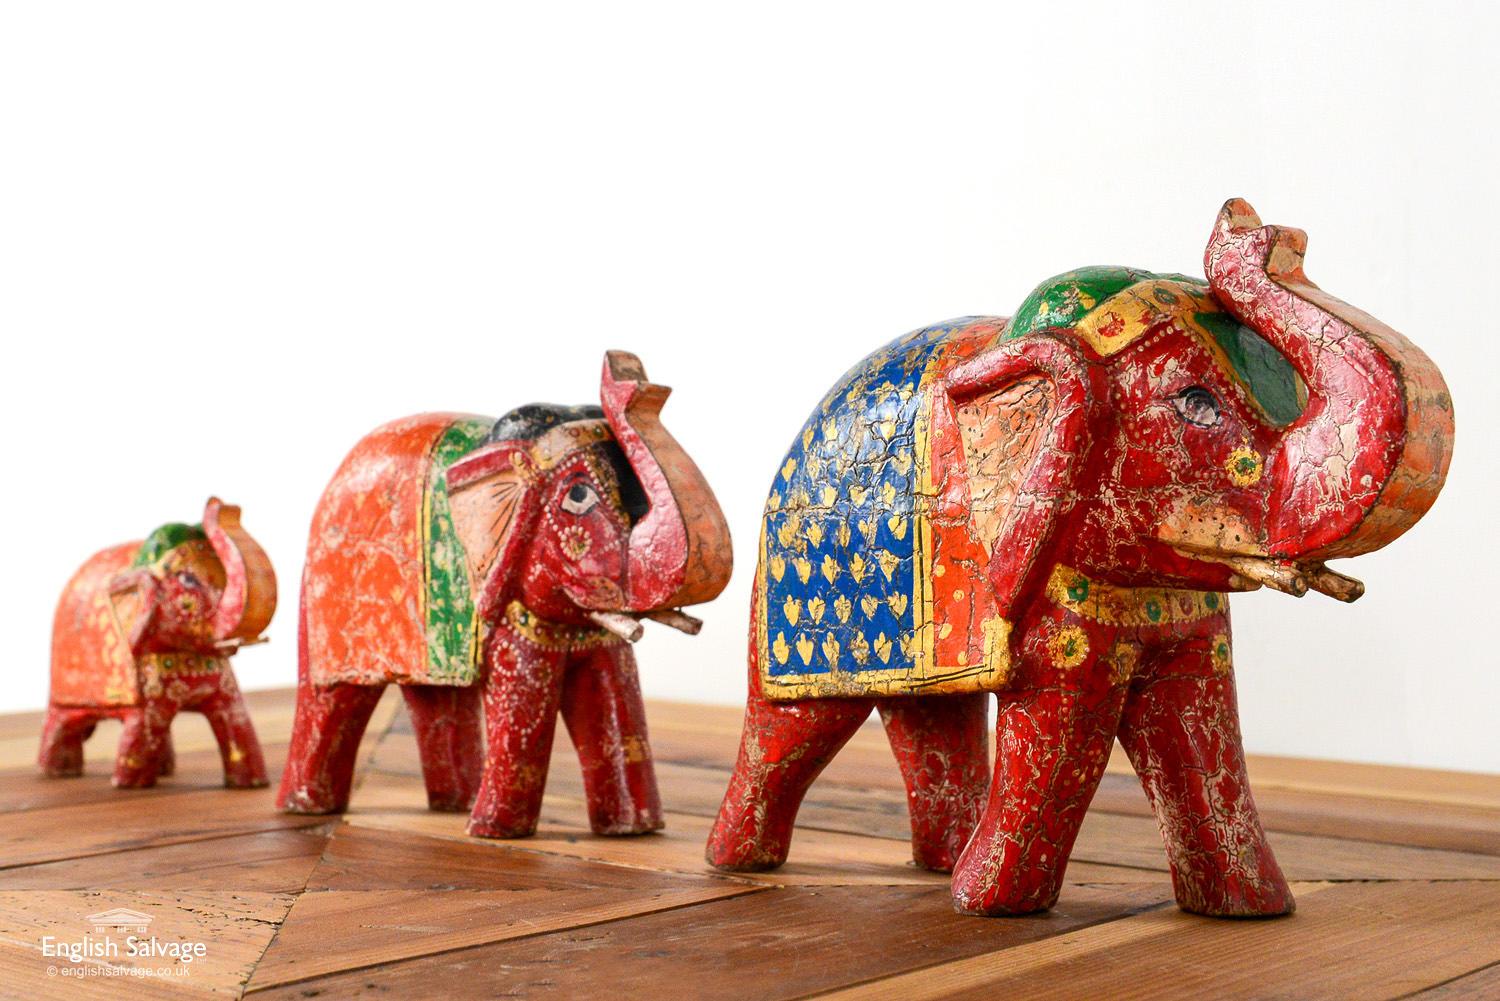 Old reclaimed hand painted wooden Indian elephants. Large elephants (x1) £100 measure: 10 cm x 19 cm x24 cm. Medium elephants (x2)  measure: 8 cm x 16 cm x 20 cm. Small elephants (x2)  measure: 5 cm x 11 cm x 13 cm. Chips and scuffs to the paintwork